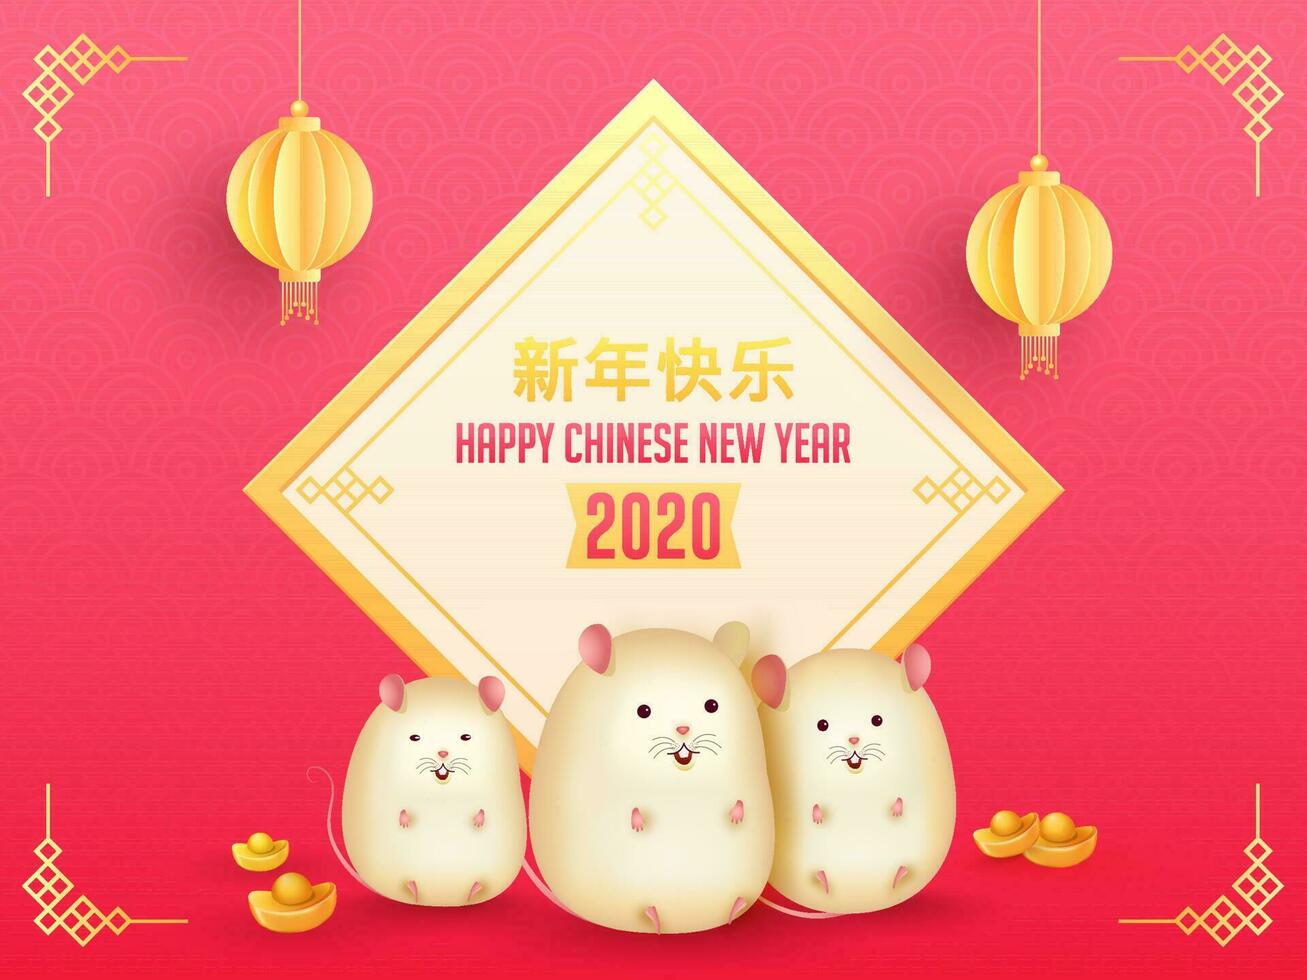 Happy Chinese New Year 2020 celebration greeting card with cute rat characters, ingots and hanging paper cut lanterns decorated on pink background. vector